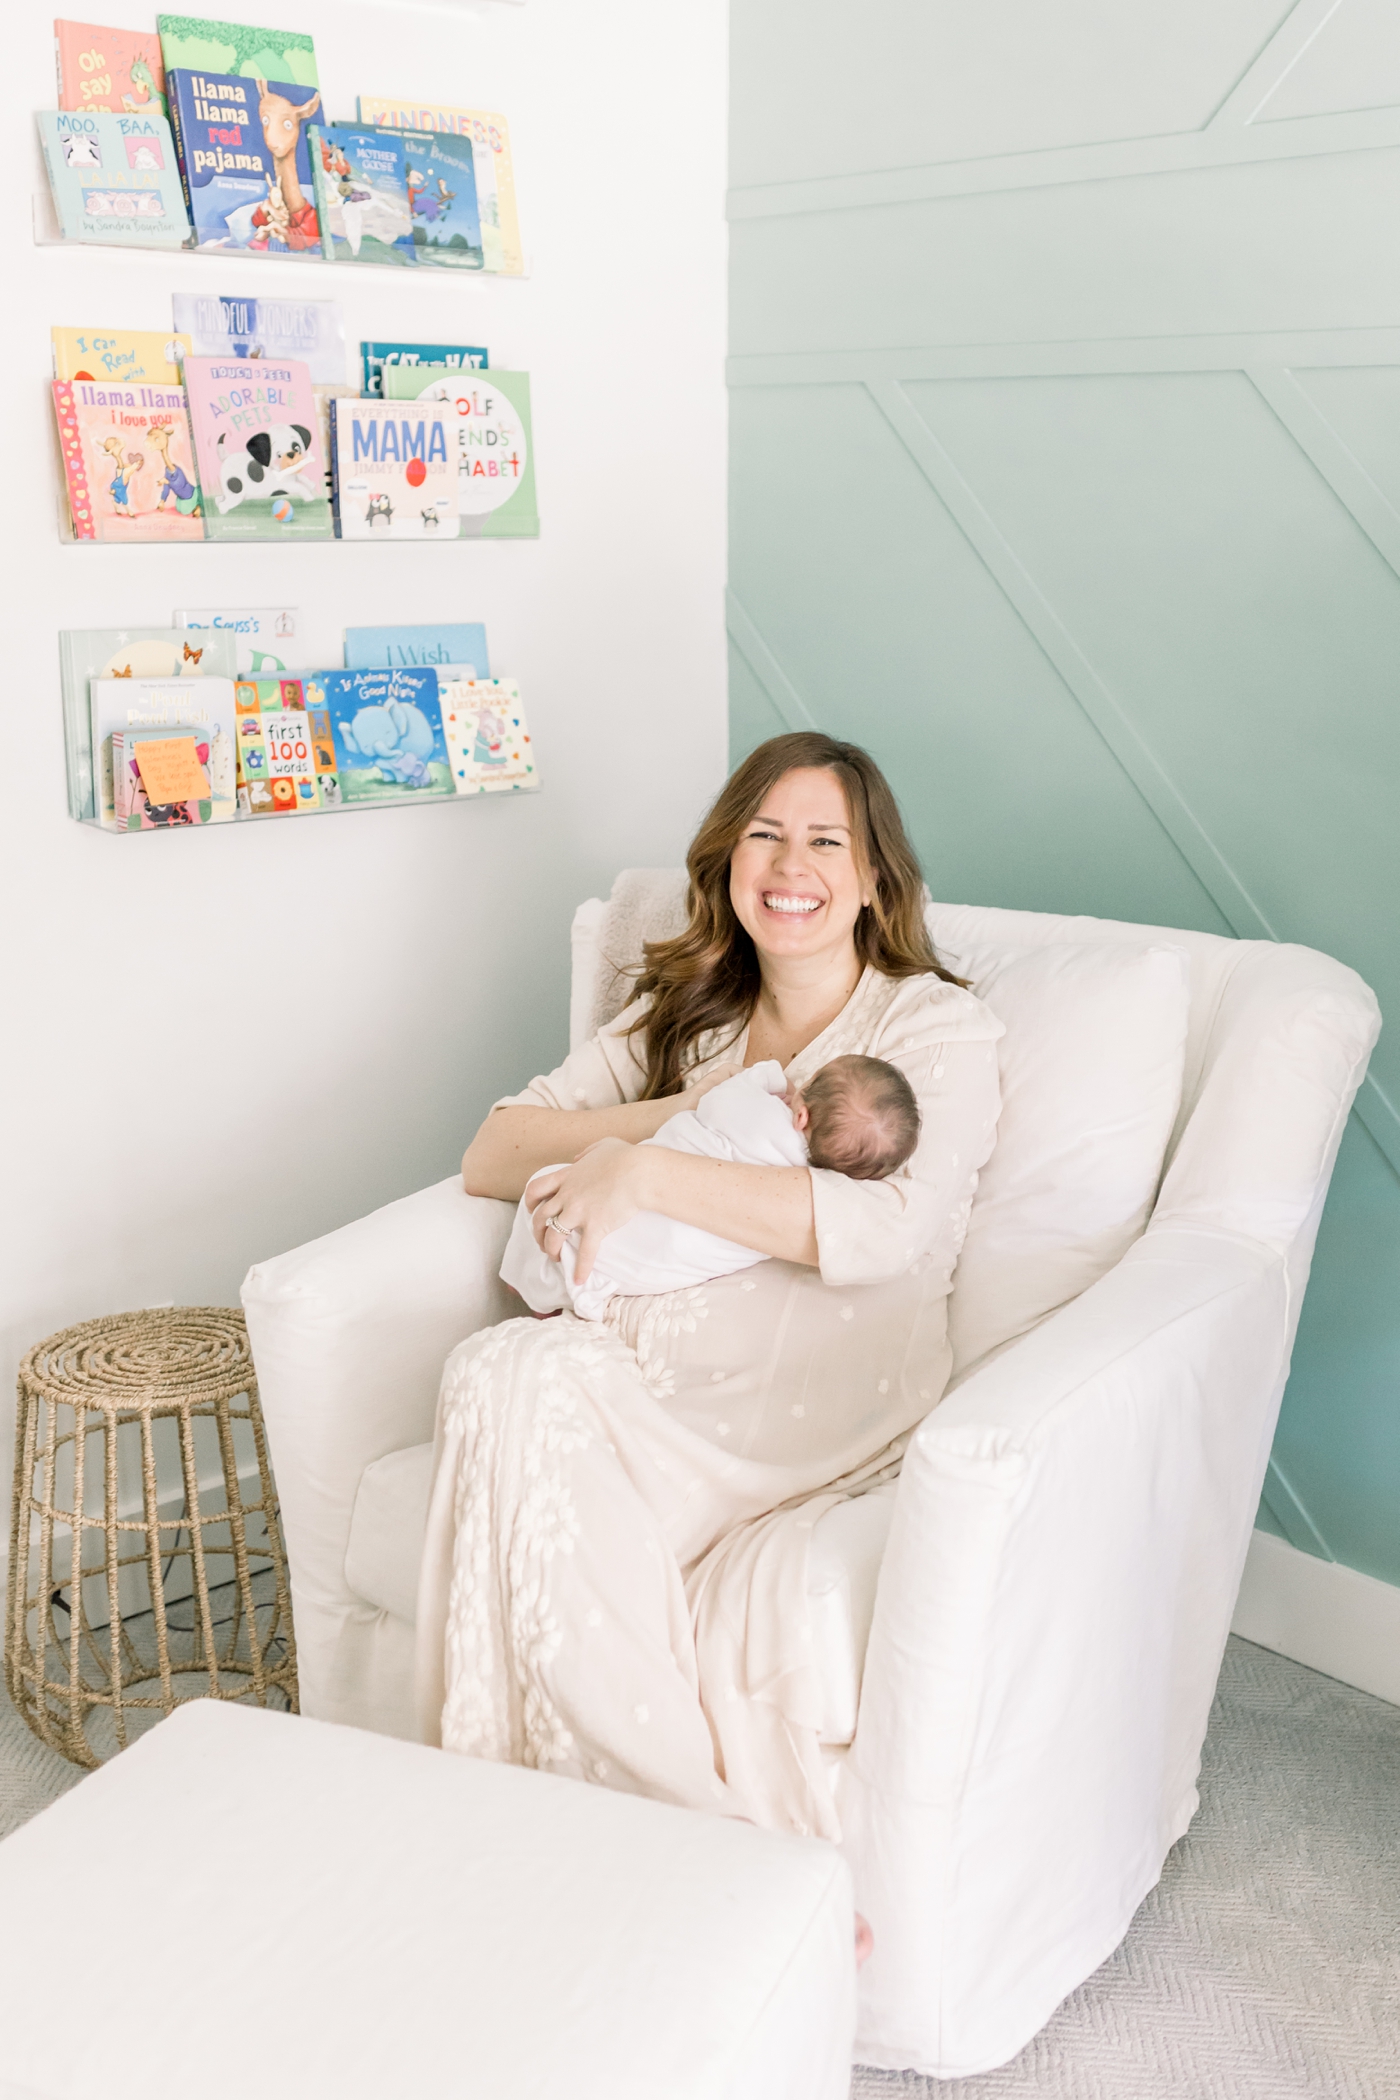 Mom smiling holding her baby during their in home newborn session | Photo by Caitlyn Motycka Photography.